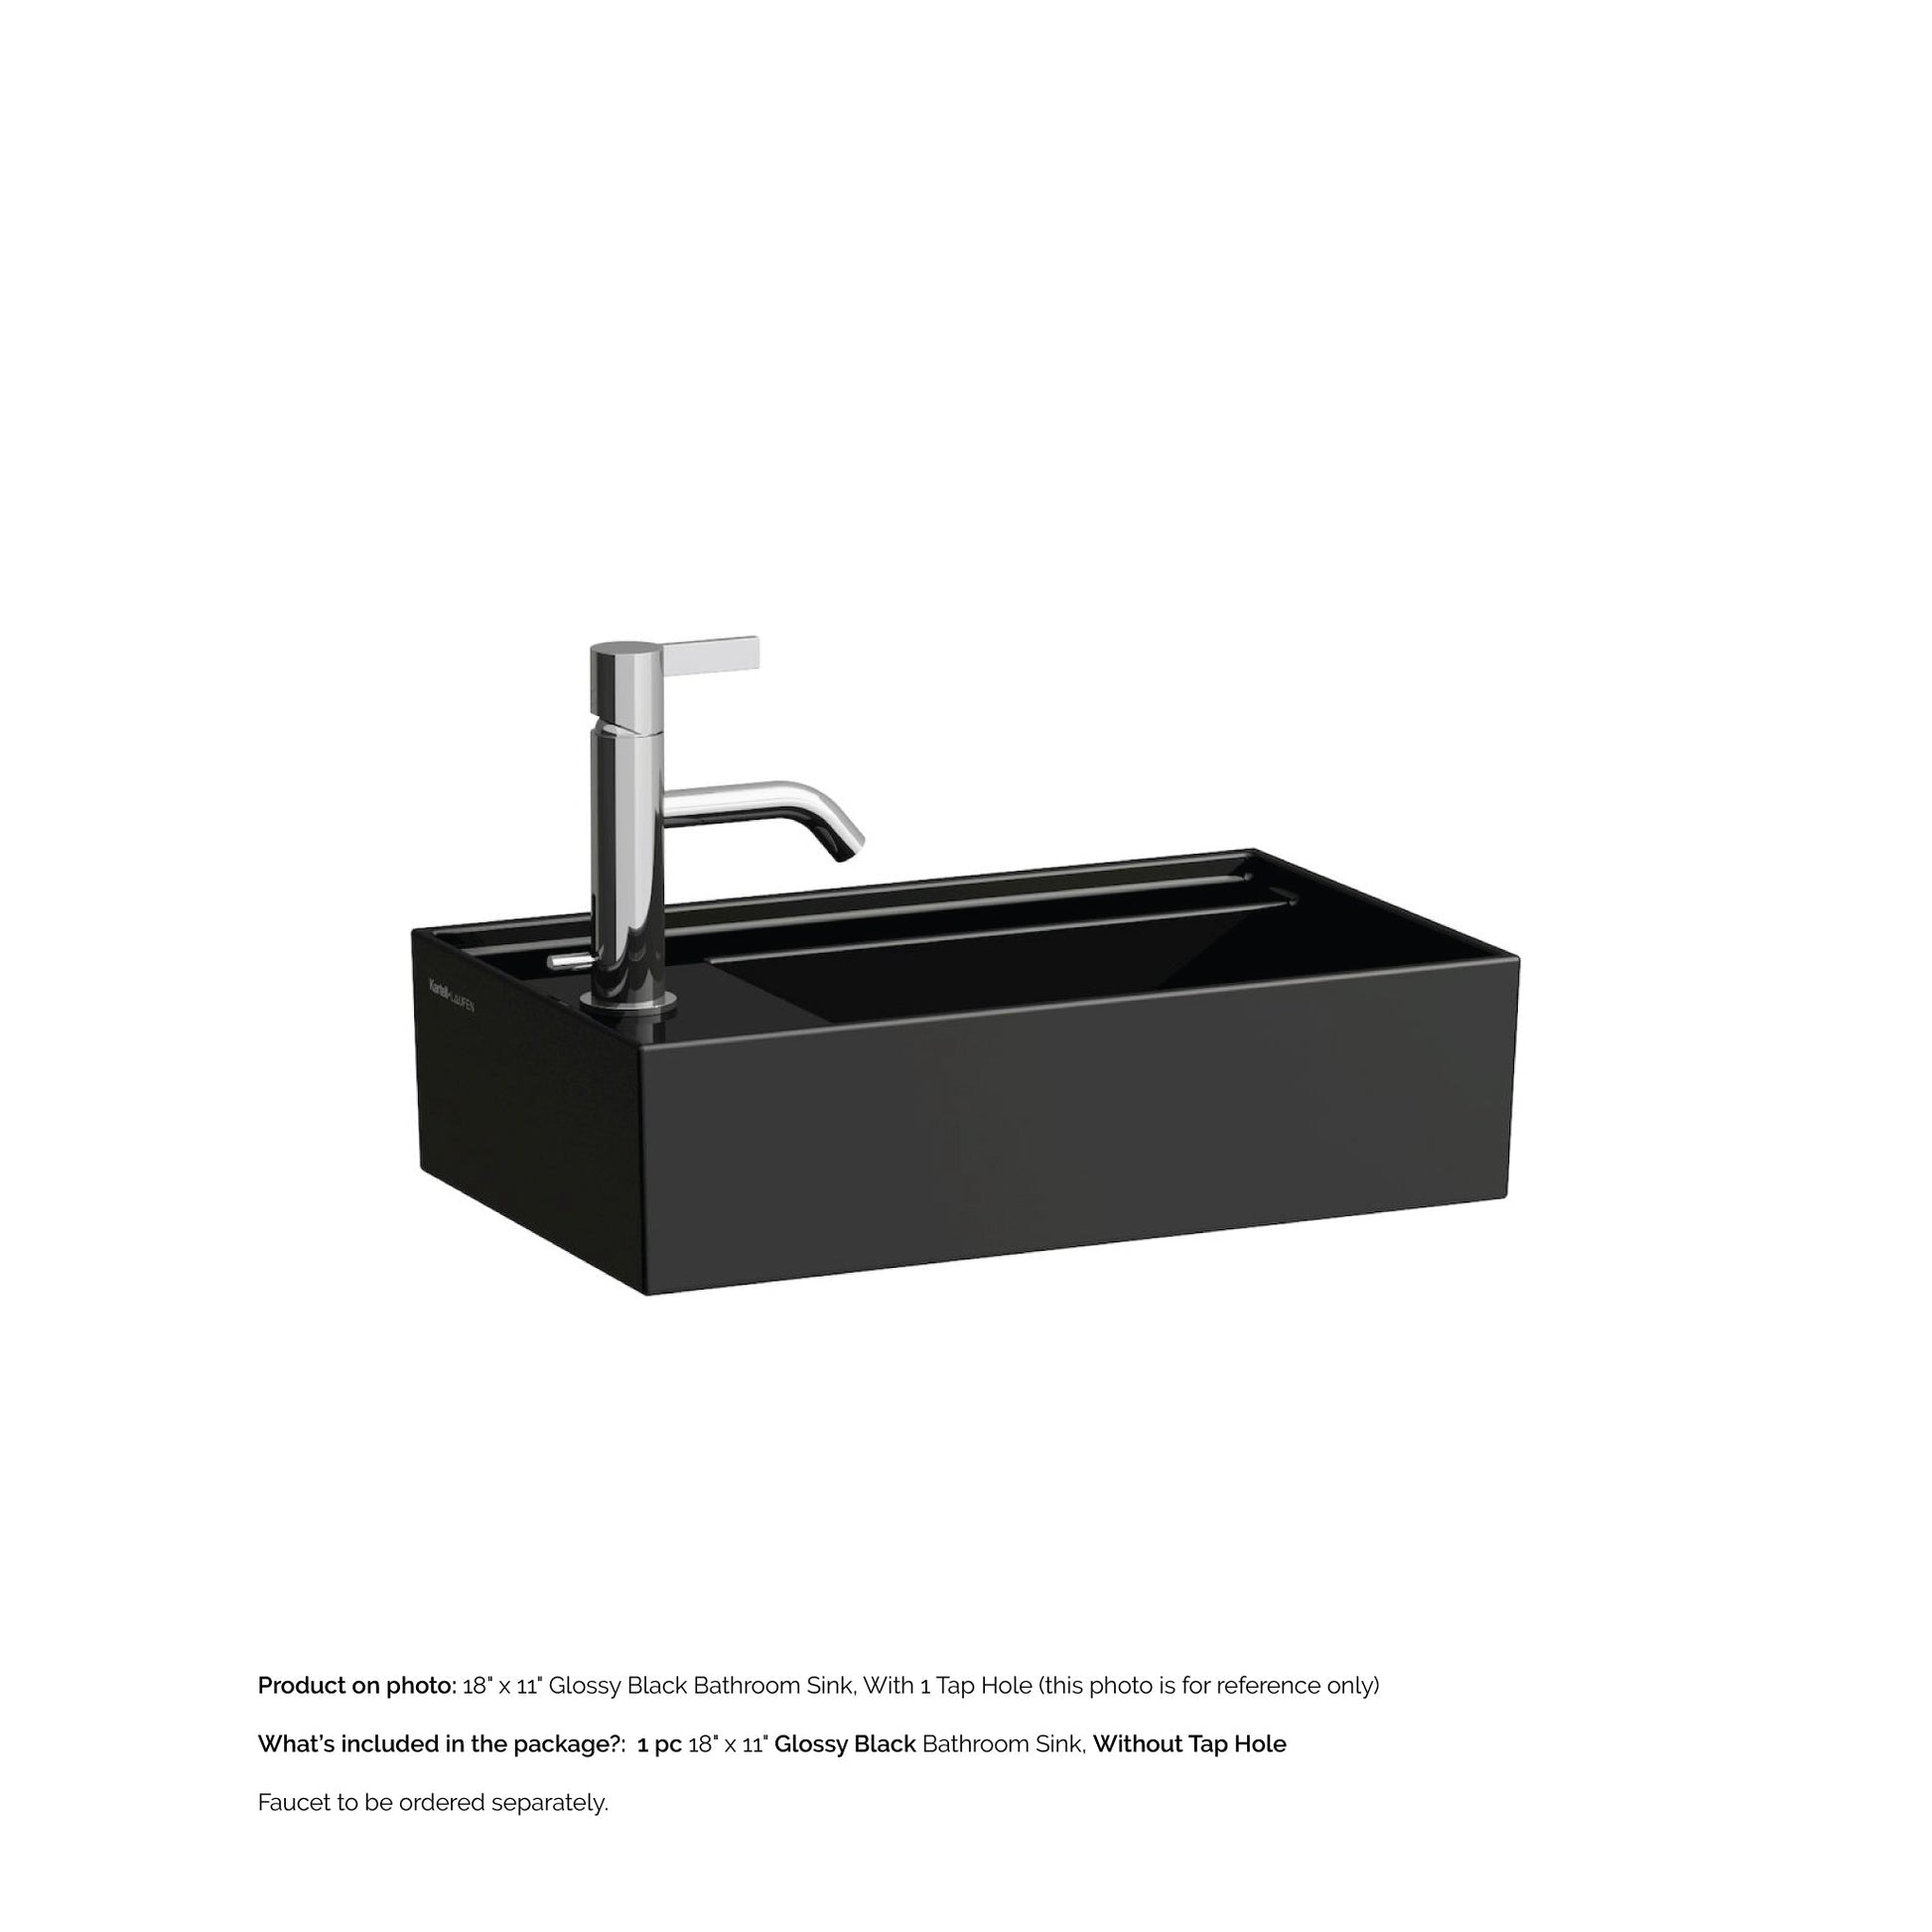 Laufen Kartell 18" x 11" Glossy Black Wall-Mounted Tap Bank-Left Bathroom Sink Without Faucet Hole